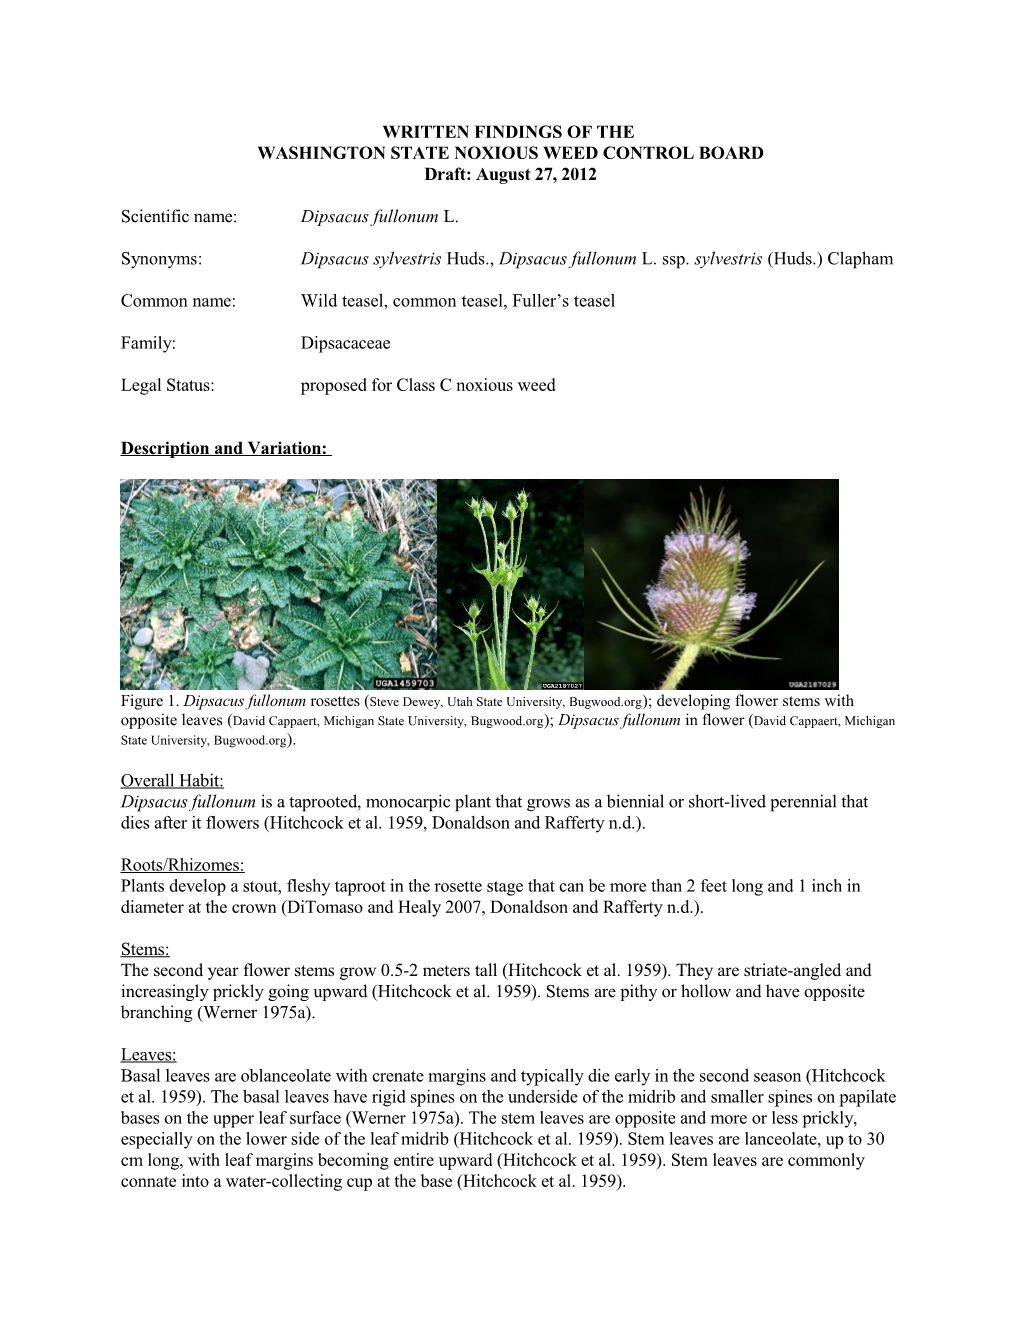 Washington State Noxious Weed Control Board